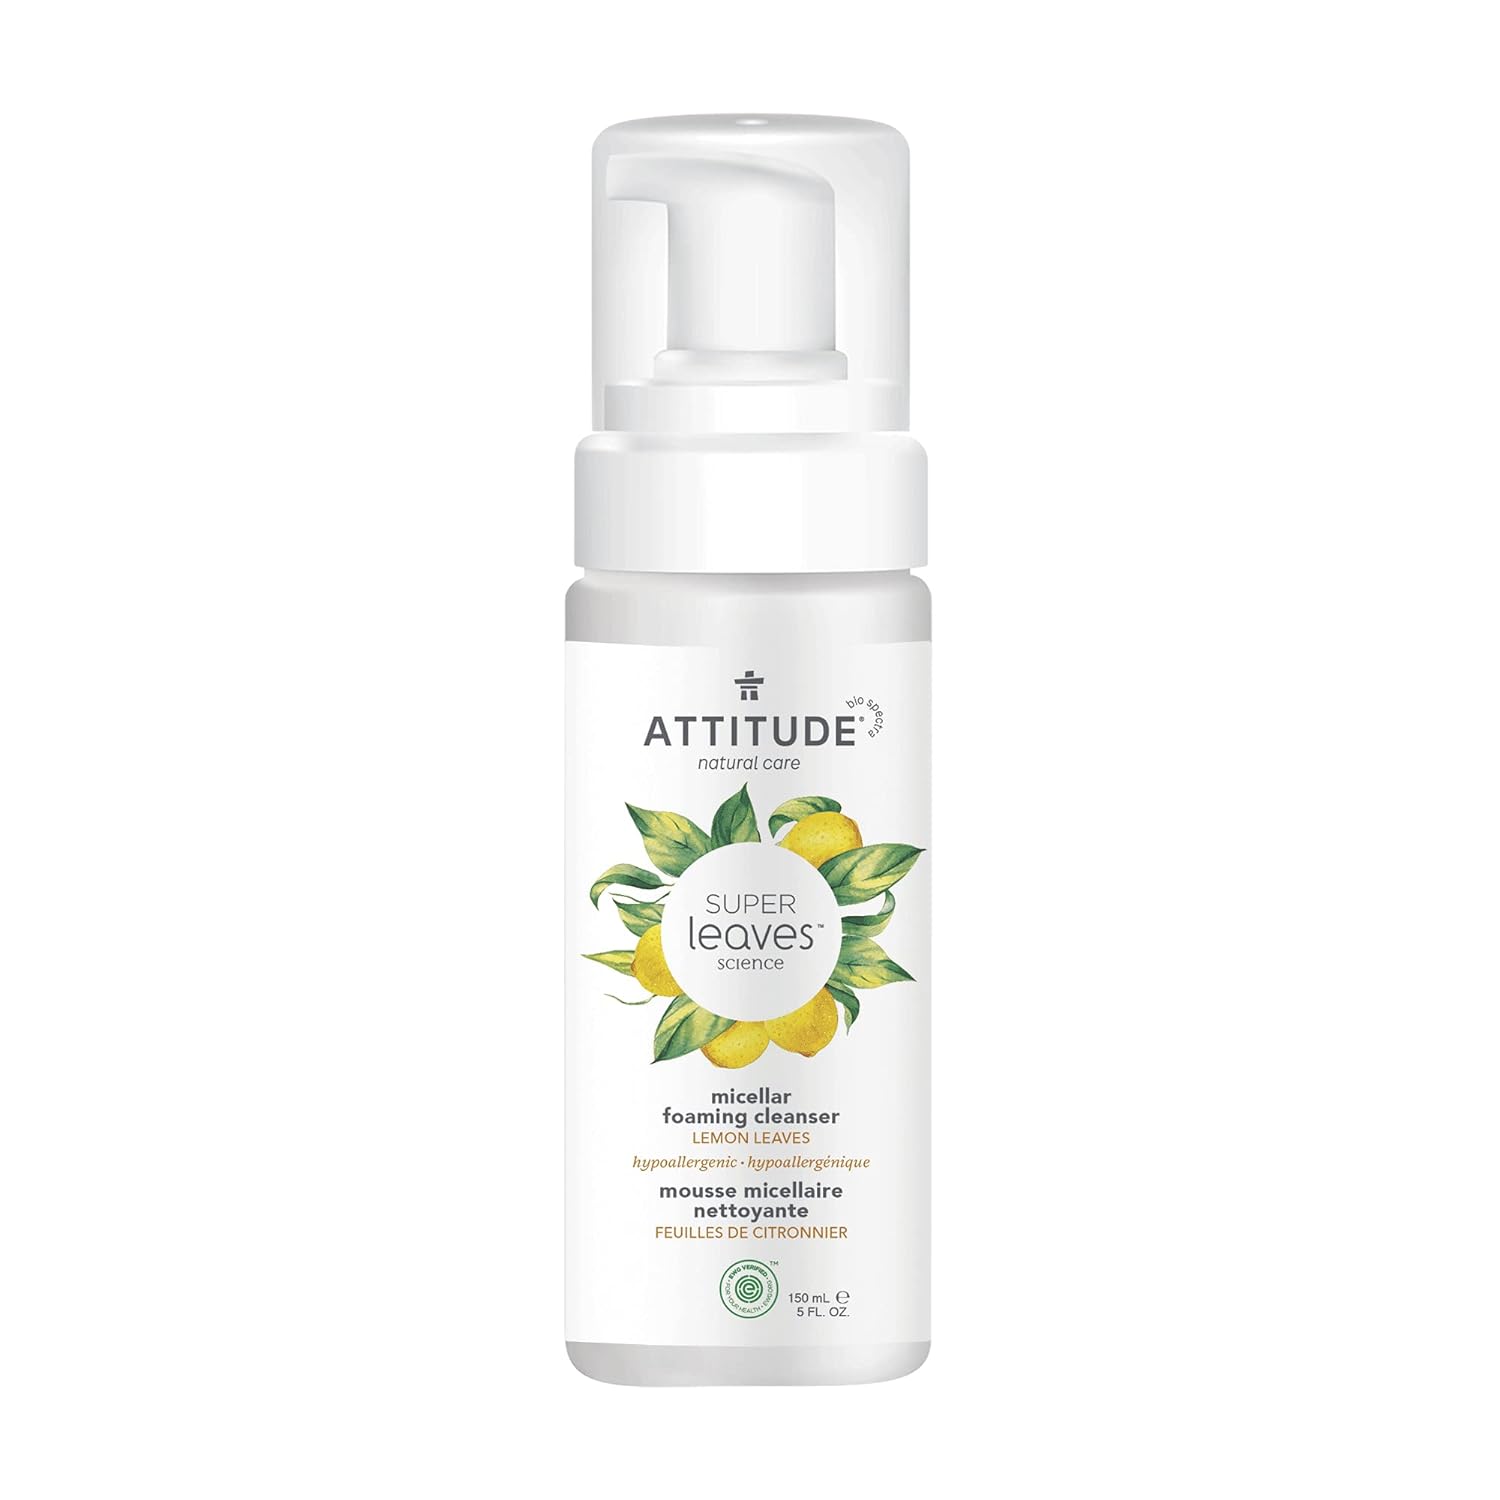 ATTITUDE Micellar Foaming Facial Cleanser, EWG Verified, Dermatologically Tested, Plant and Mineral-Based, Vegan, Lemon Leaves, 5 Fl Oz